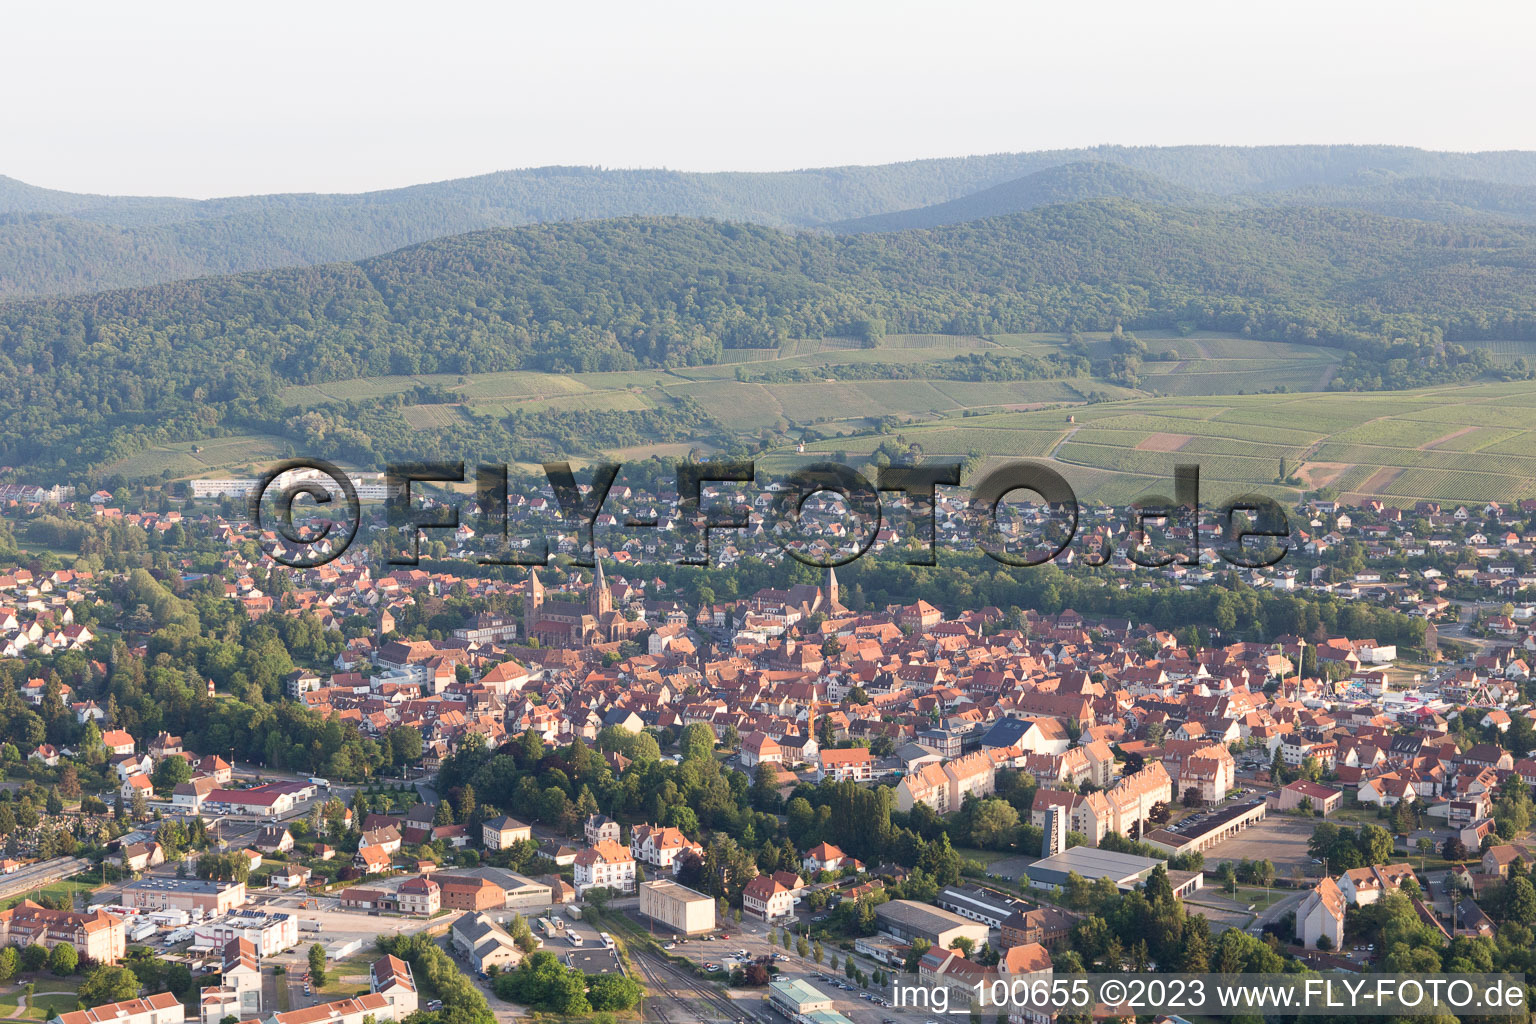 Altenstadt in the state Bas-Rhin, France from above